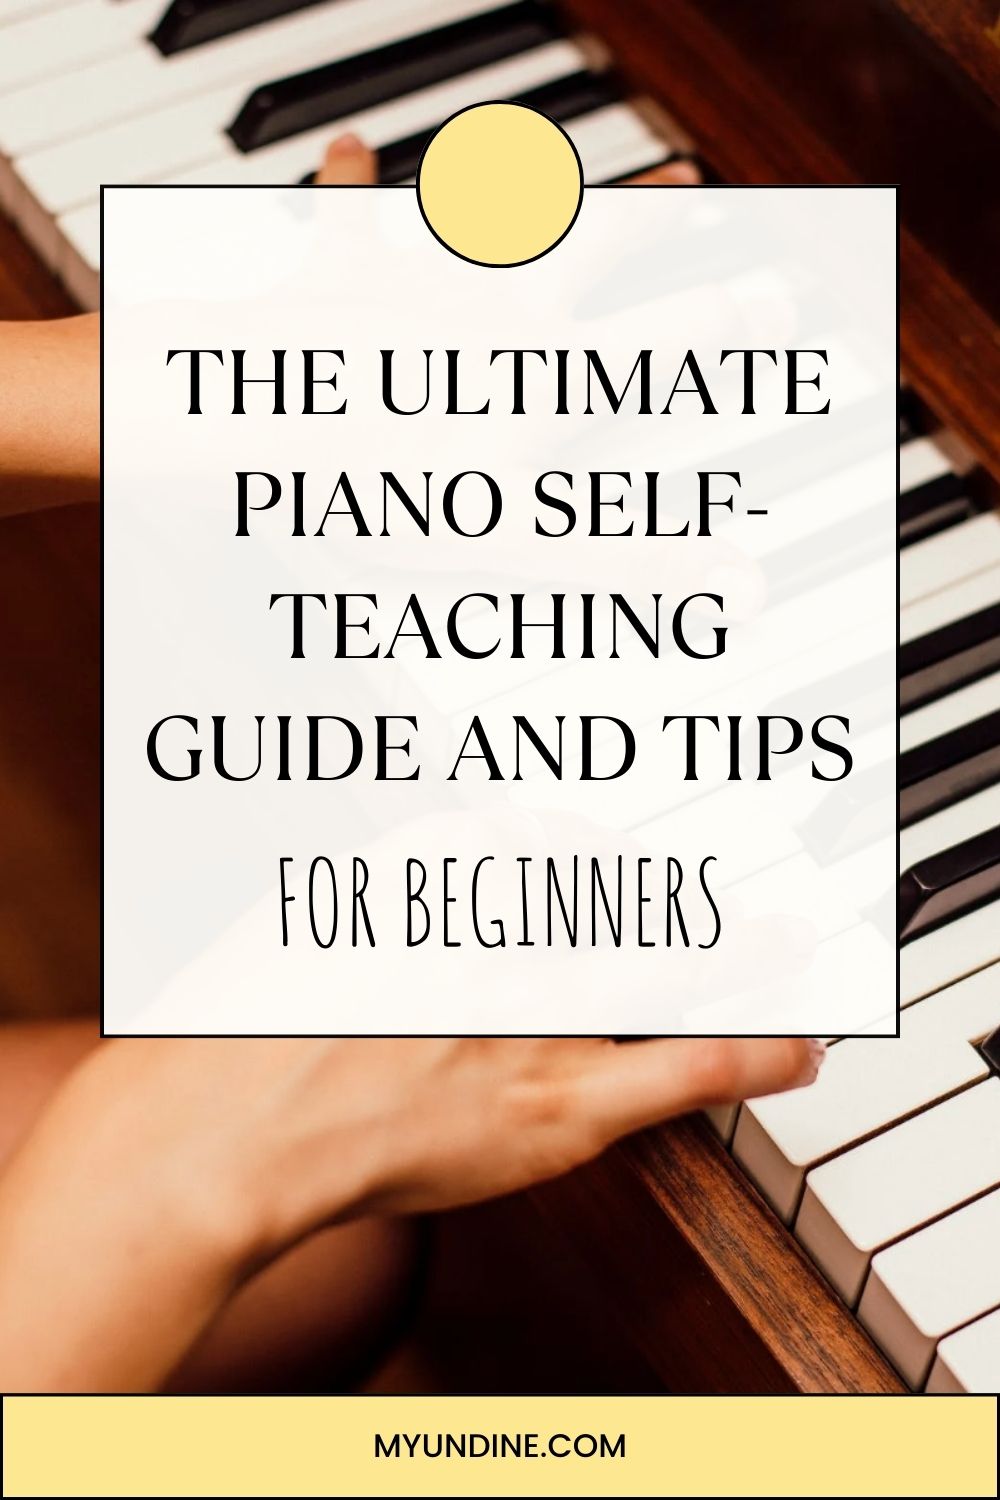 The Ultimate Piano Self-Teaching Guide and Tips for Beginners